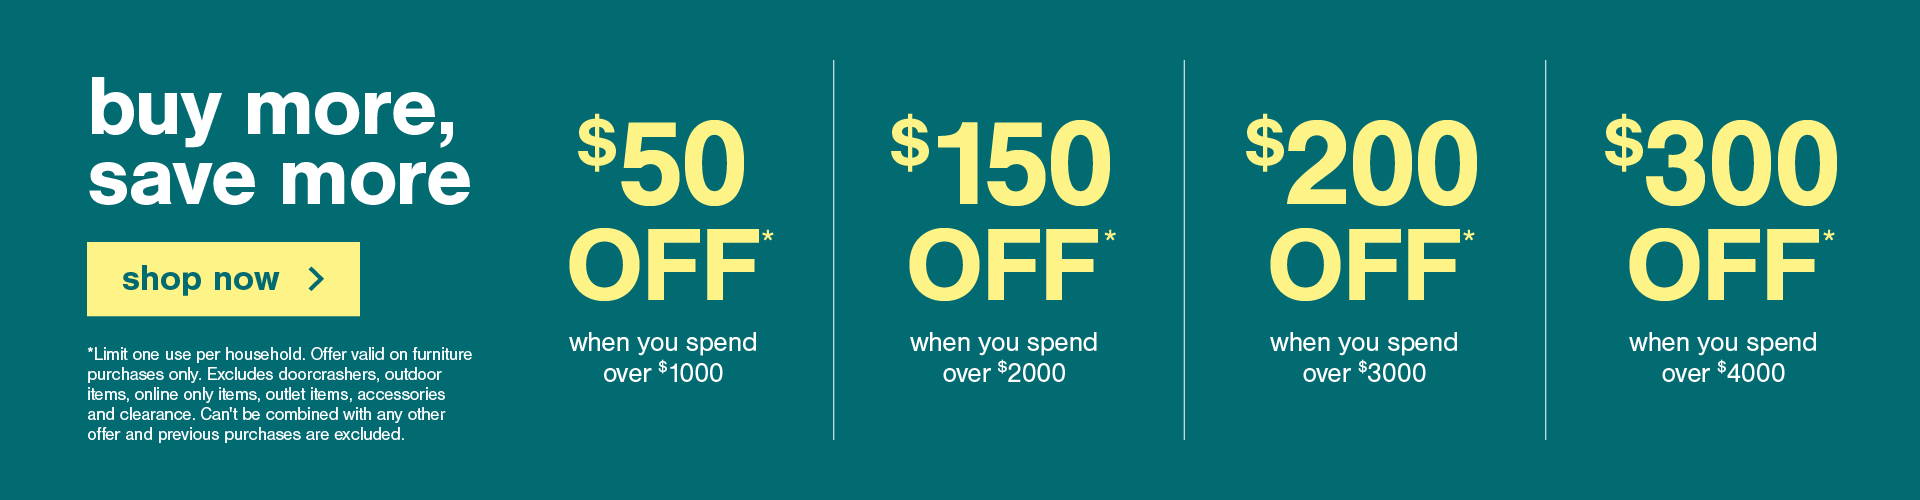 buy more save more up to $300 off